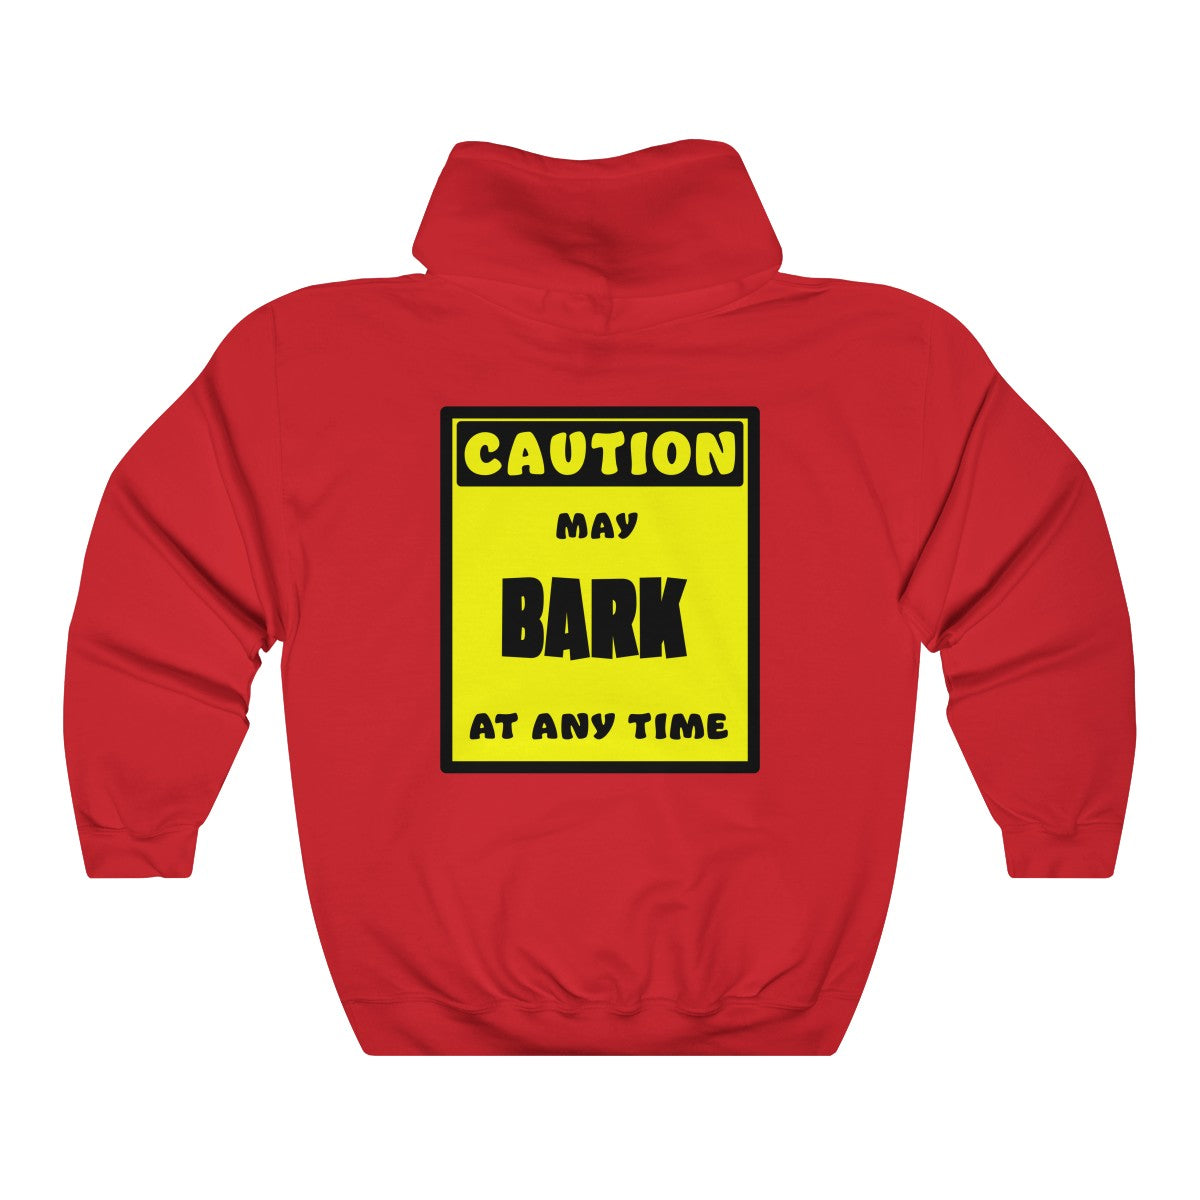 CAUTION! May BARK at any time! - Hoodie Hoodie AFLT-Whootorca Red S 